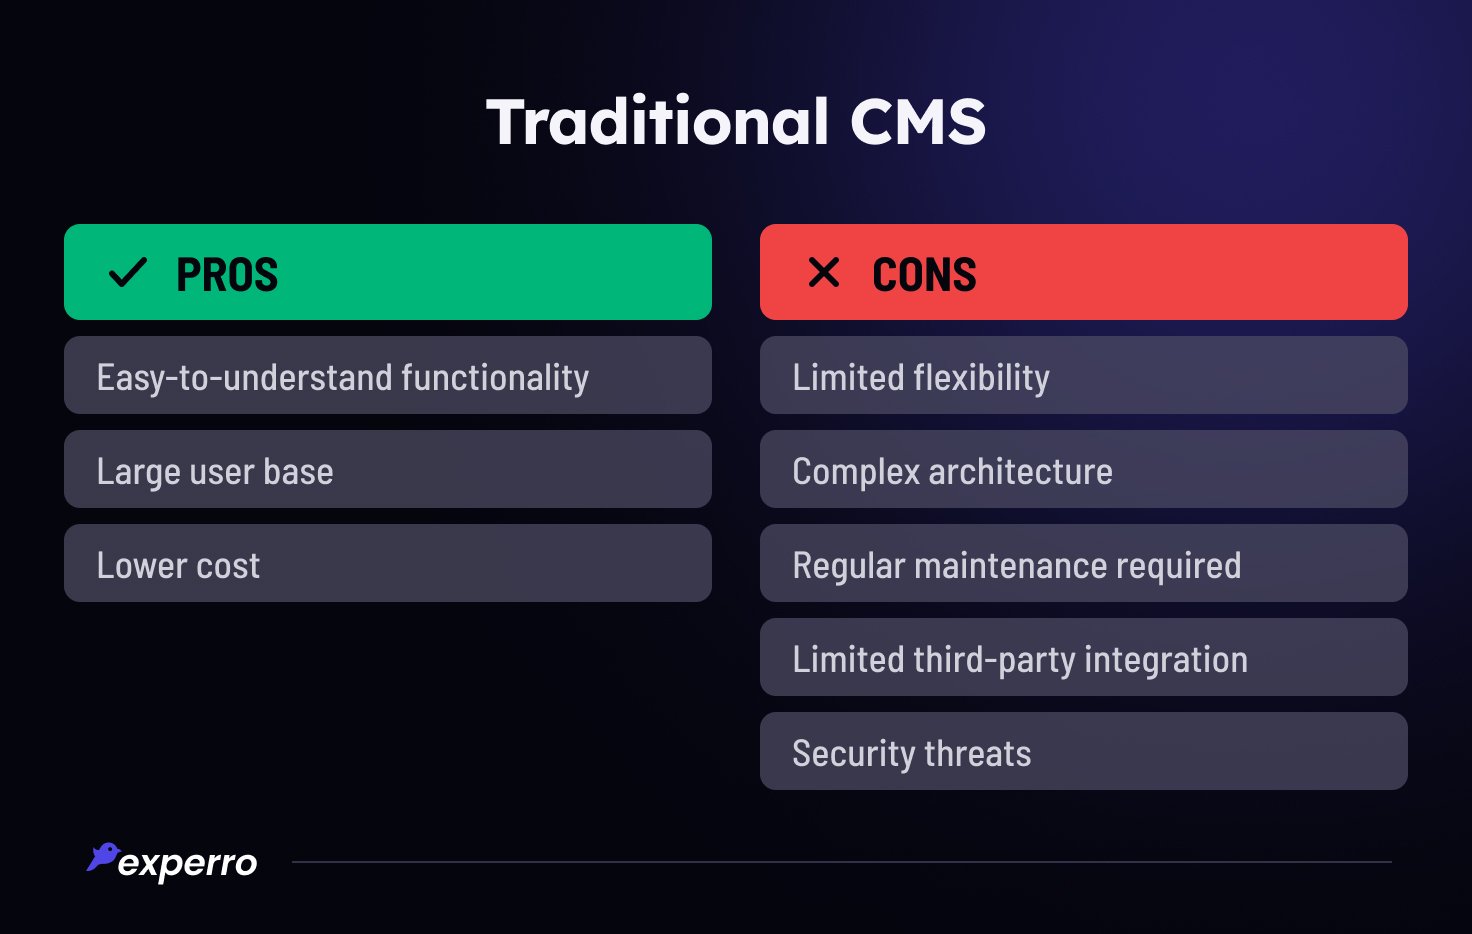 Traditional CMS Pros & Cons